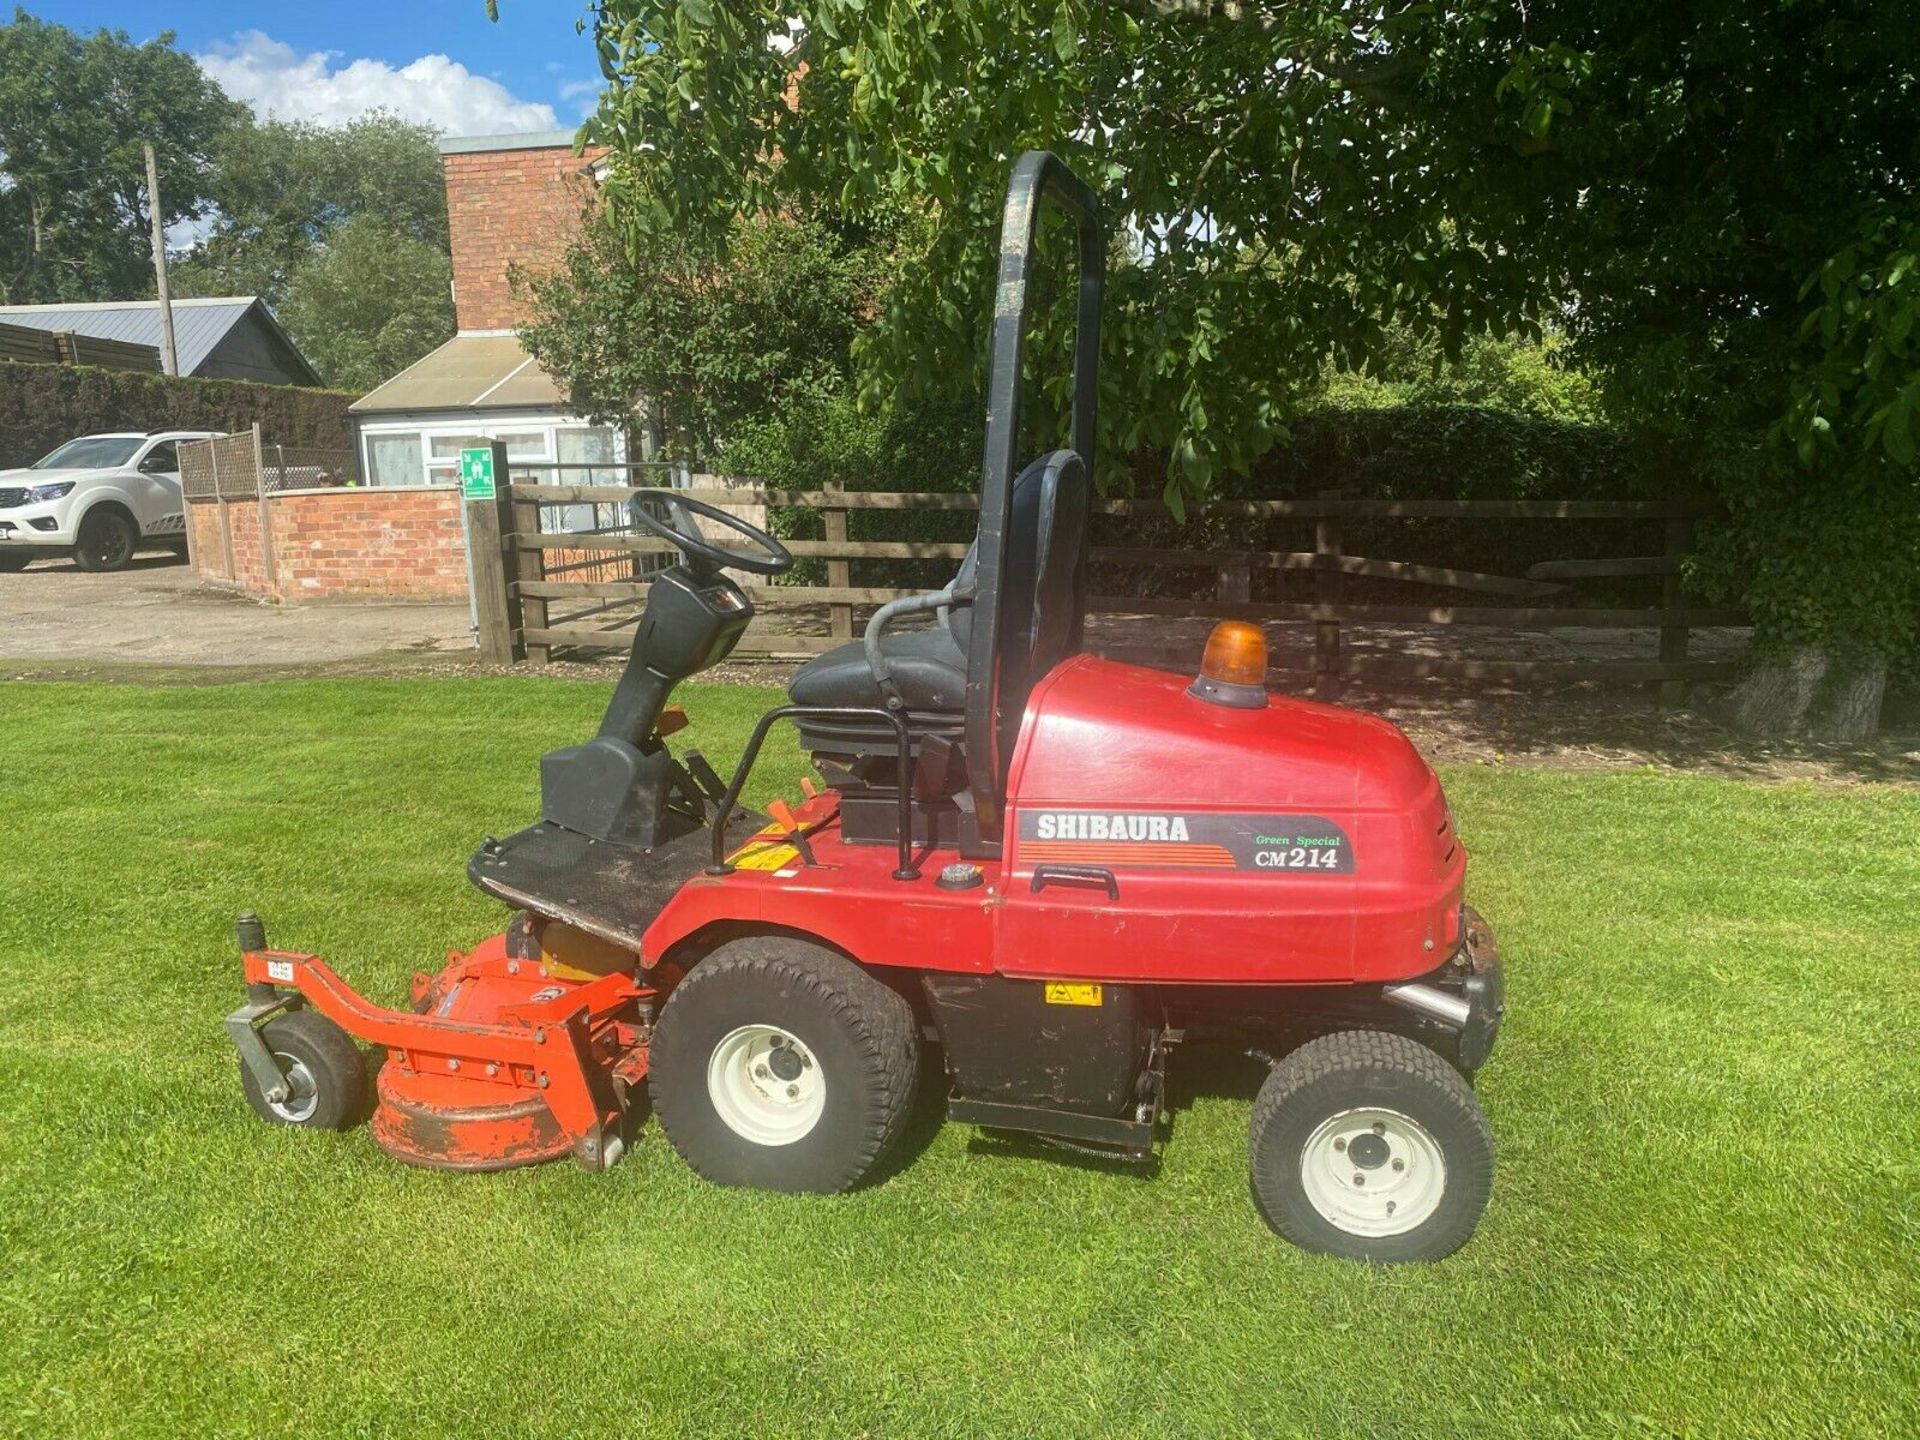 SHIBAURA CM214 UPFRONT ROTARY, DIESEL, 48" CUT REAR DISCHARGE, RIDE ON MOWER *PLUS VAT* - Image 7 of 7